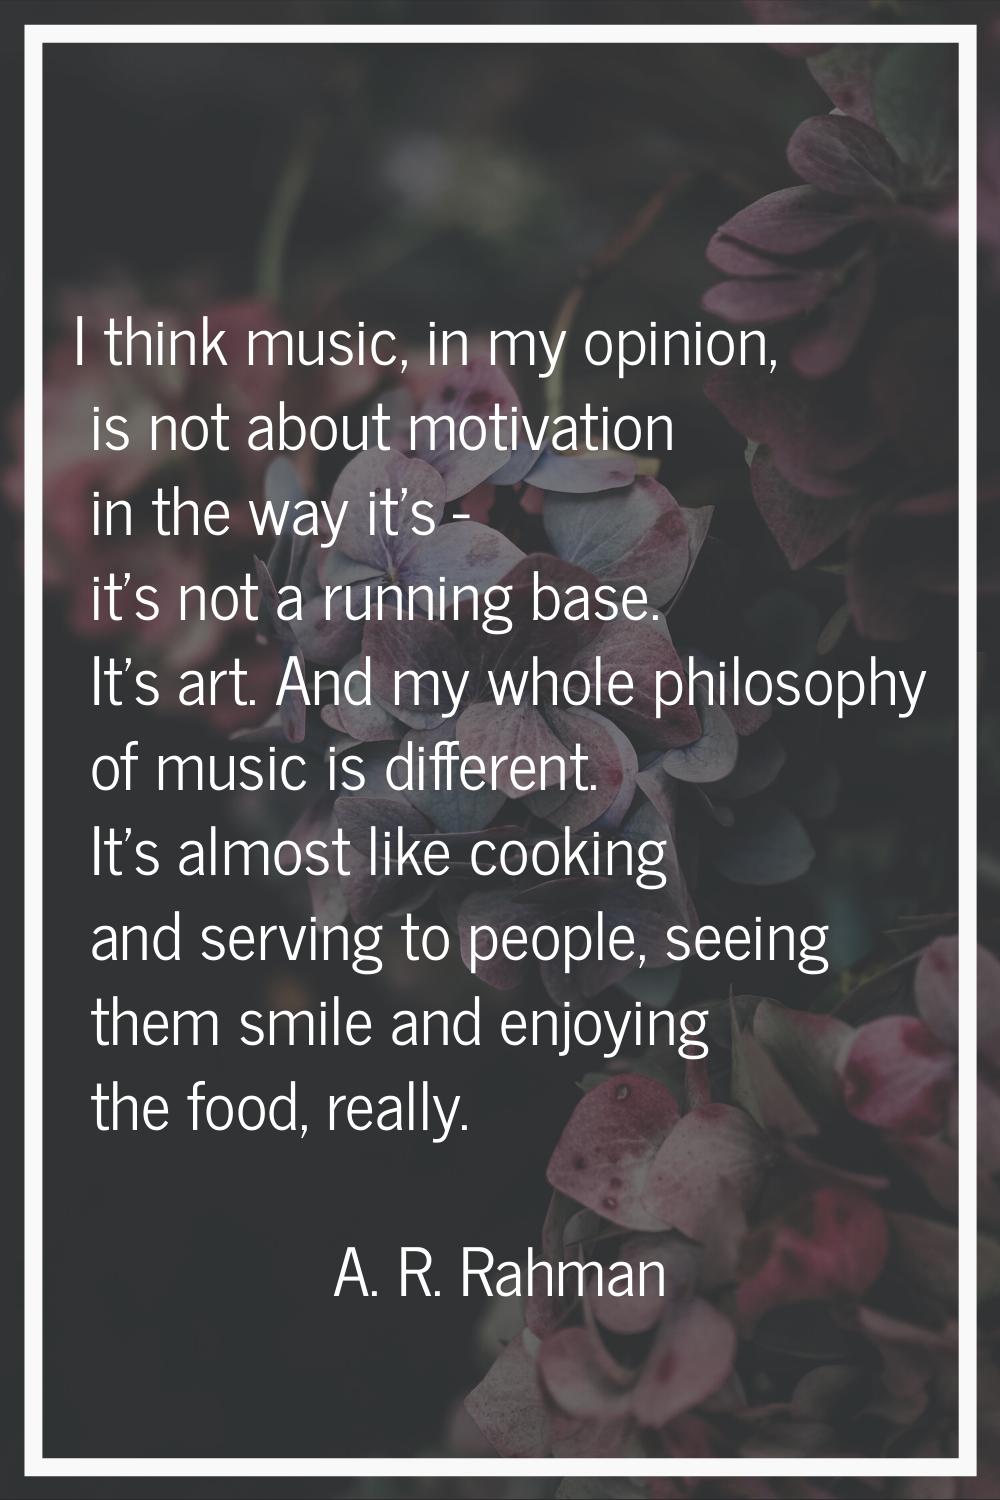 I think music, in my opinion, is not about motivation in the way it's - it's not a running base. It